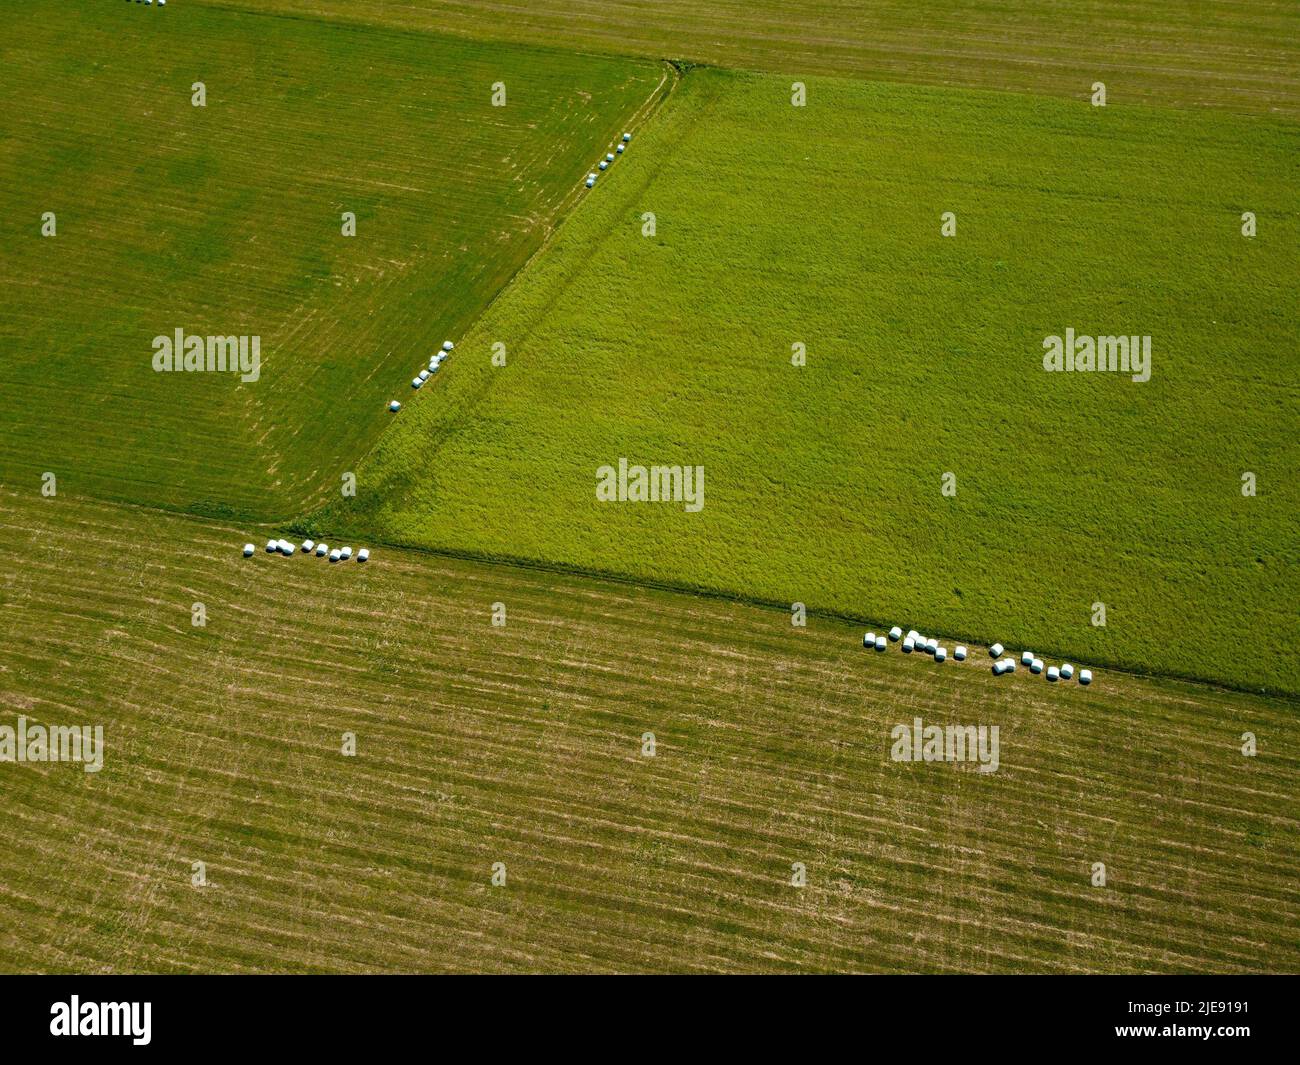 Agricultural fields with cut grass standing in rolls of hay standing in the middle of the field. Aerial view. Drone shot. Stock Photo